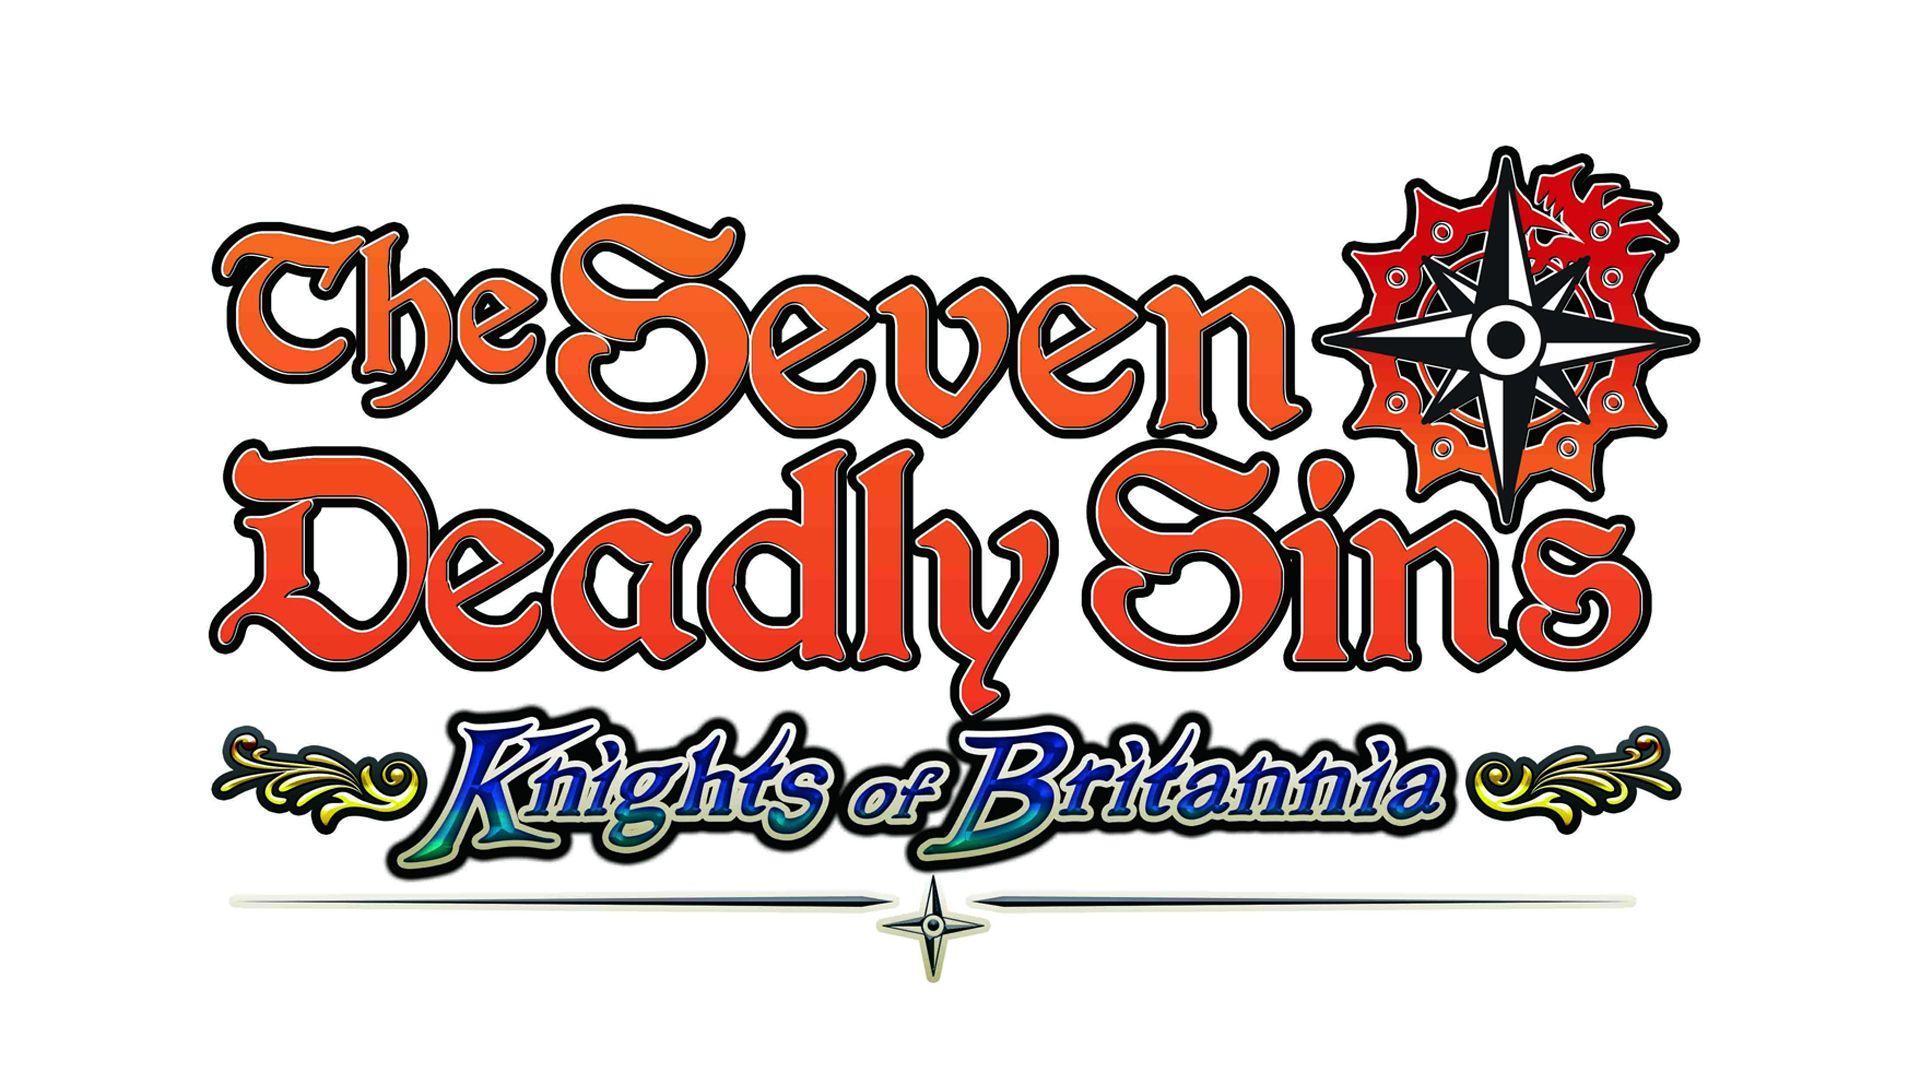 1920 x 1080 · jpeg - The Seven Deadly Sins: Knights Of Britannia Wallpapers - Wallpaper Cave